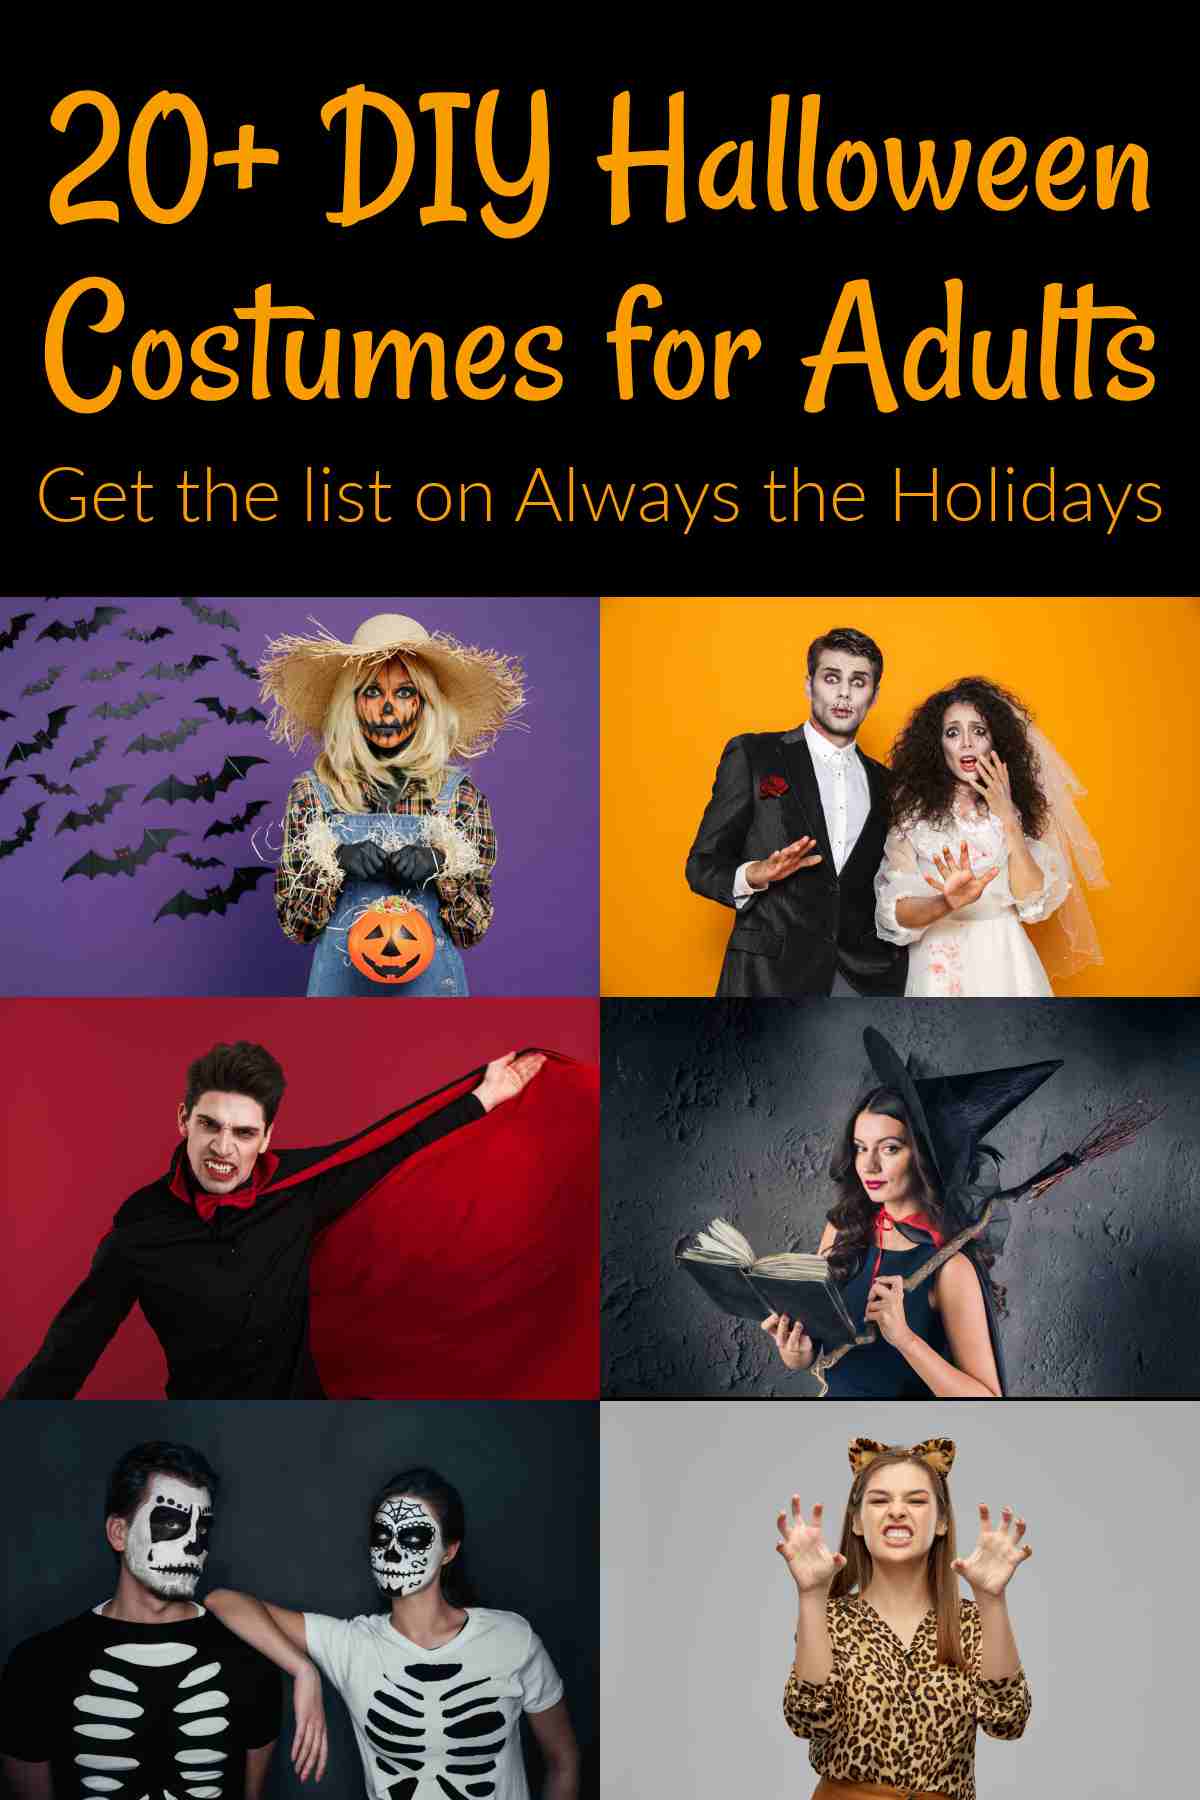 A text overlay that says "20+ DIY Halloween costumes for adults" with six adult Halloween costumes beneath it: a DIY scarecrow costume, two couples Halloween costume ideas, a homemade witch costume, an easy vampire costume and a DIY cat Halloween Costume.